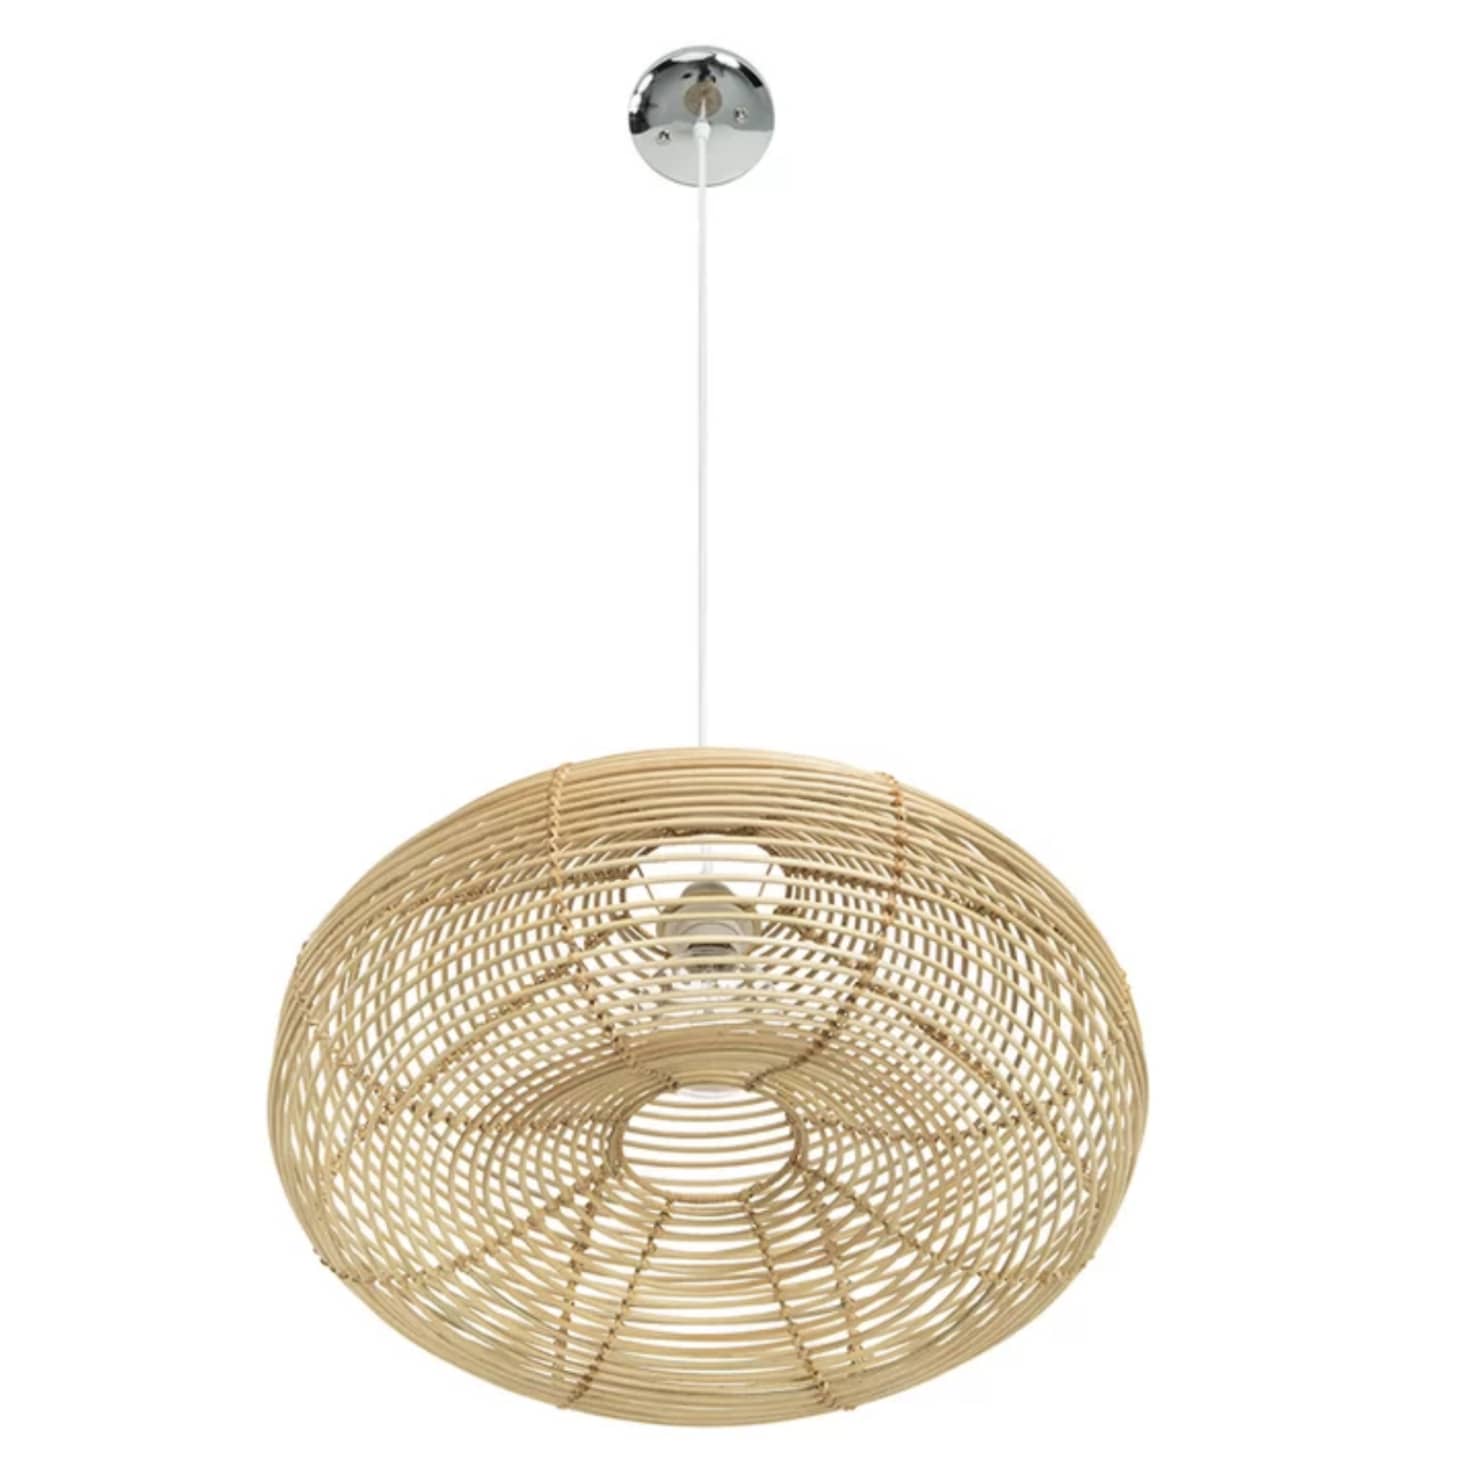 Currently Obsessed: Rattan & Wicker Pendant Lights | Apartment Therapy